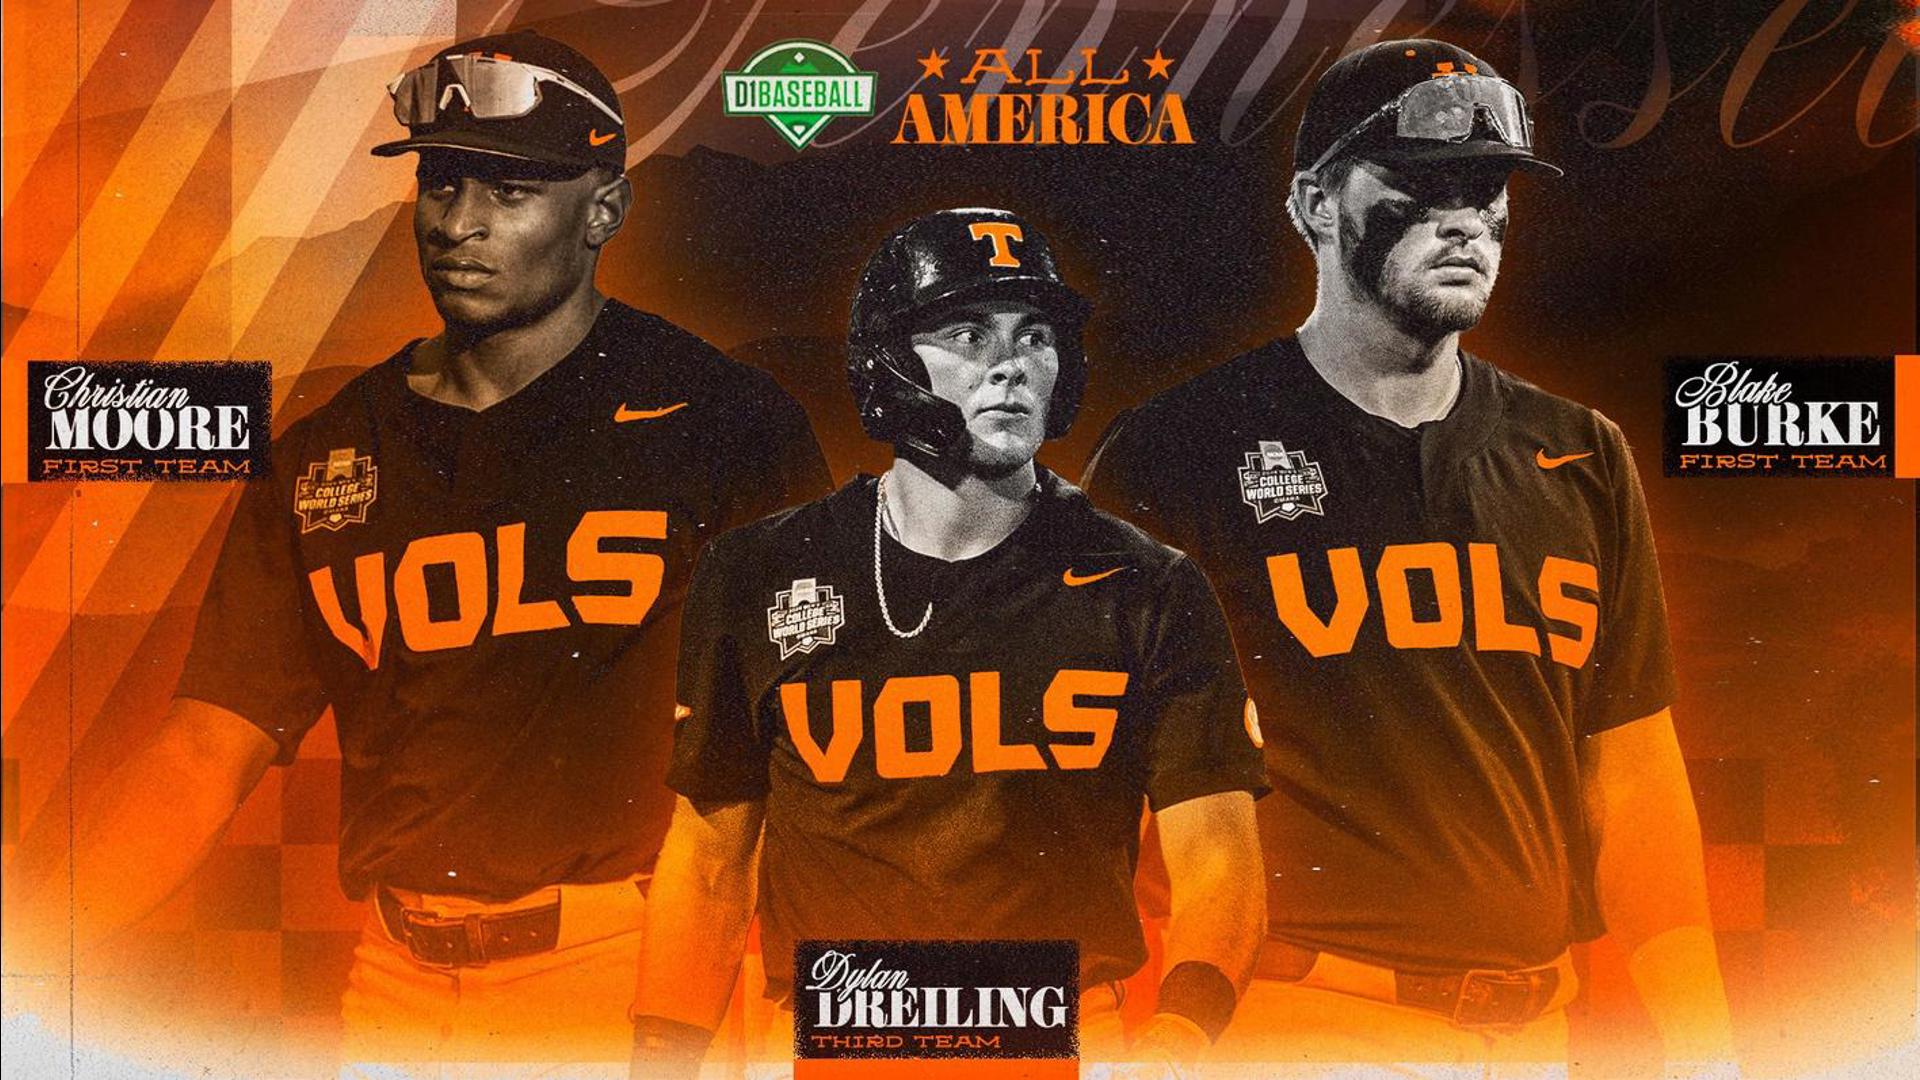 Chrisitan Moore, Dylan Dreiling and Blake Burke were all recognized for their impressive seasons after Tennessee baseball won the College World Series.